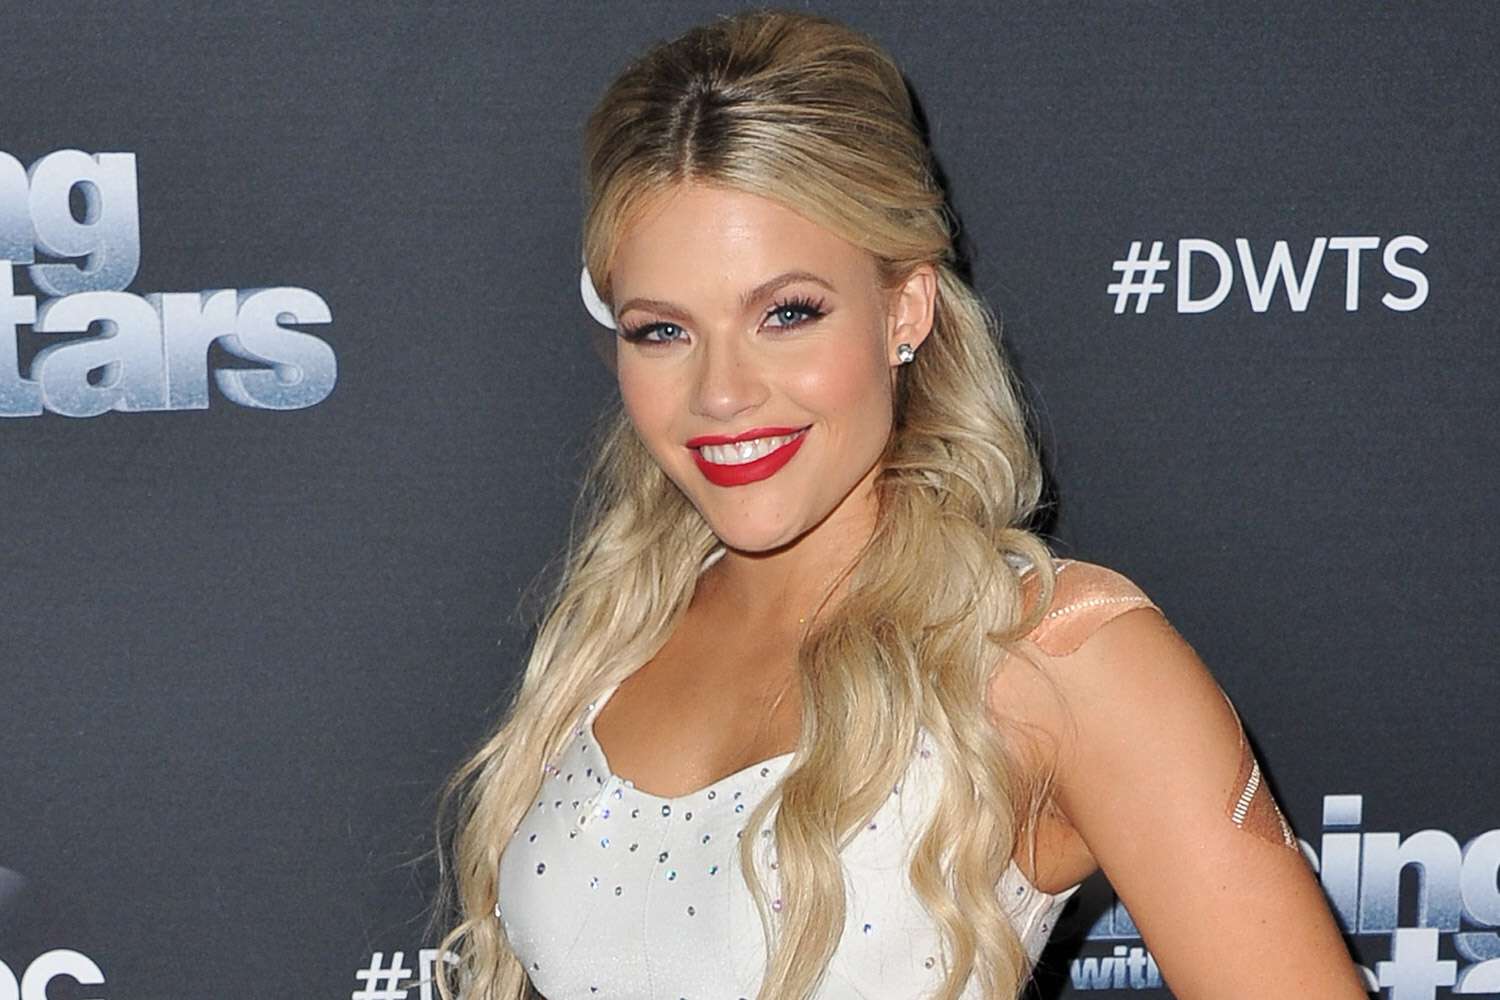 DWTS Witney Carson Says She Hid Cancer Diagnosis from Producers